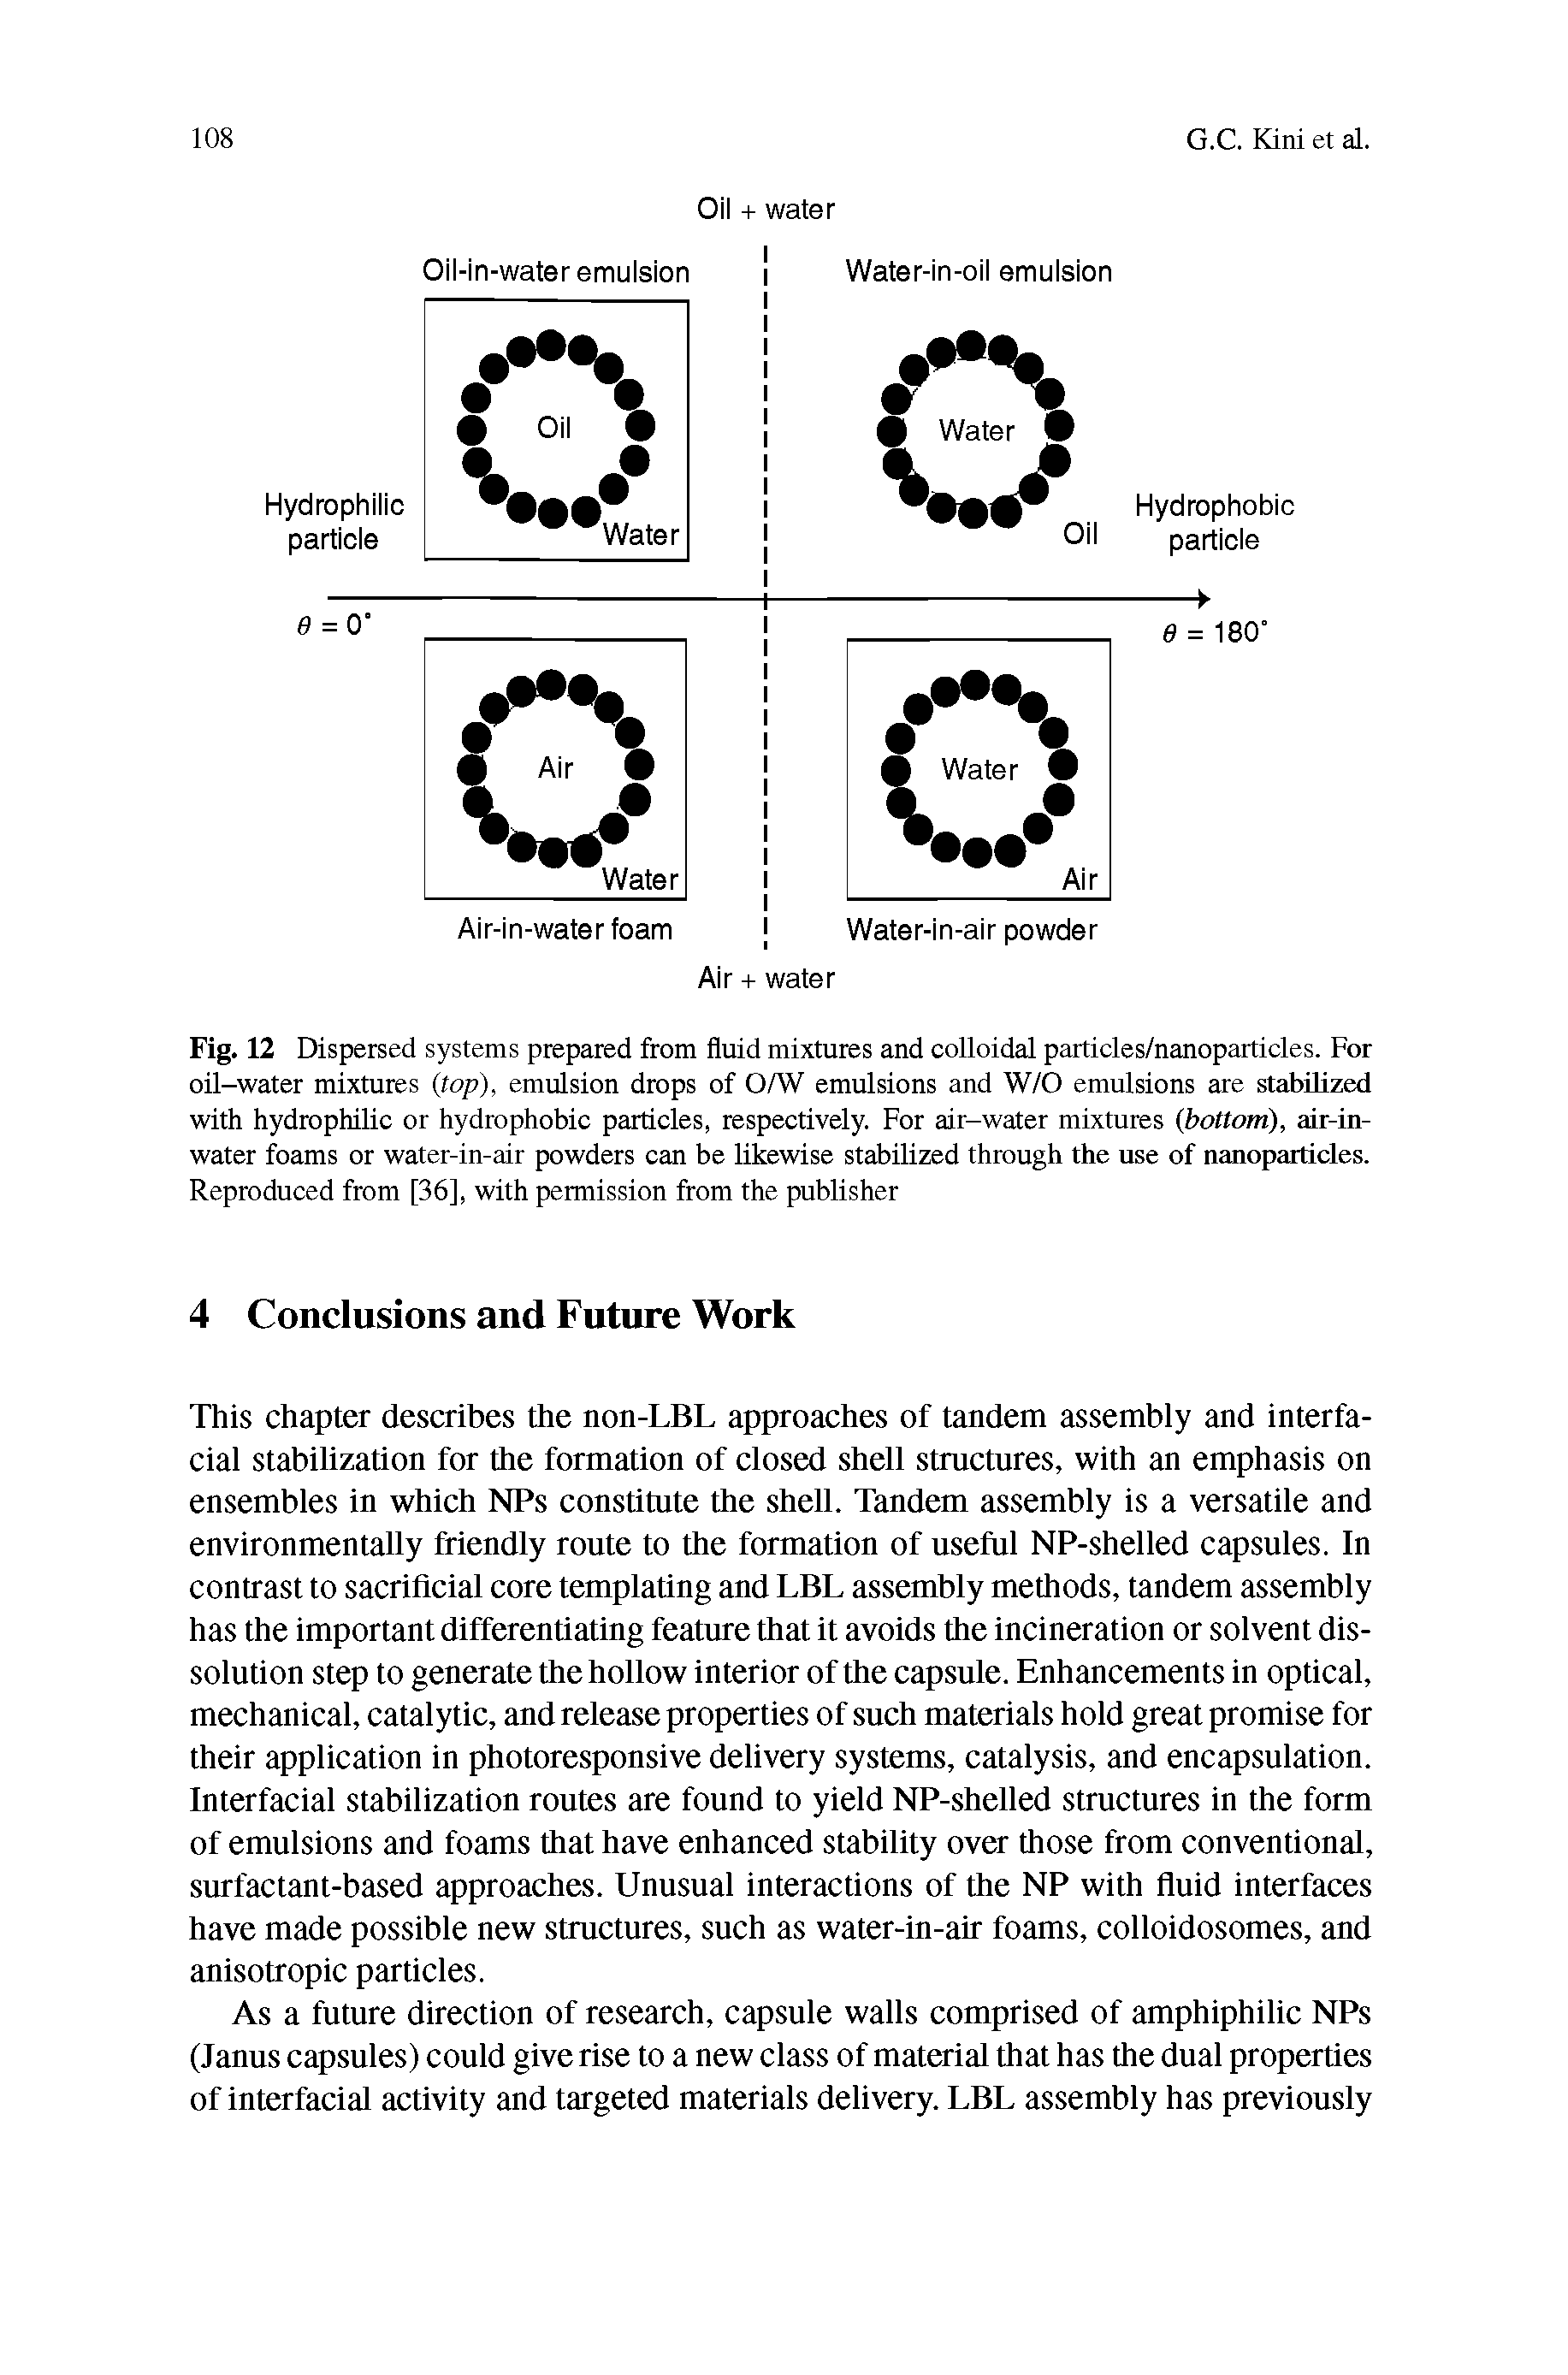 Fig. 12 Dispersed systems prepared from fluid mixtures and colloidal particles/nanoparticles. For oil-water mixtures (top), emulsion drops of OfW emulsions and W/O emulsions are stabilized with hydrophilic or hydrophobic particles, respectively. For air-water mixtures (bottom), air-in-water foams or water-in-air powders can be likewise stabihzBd through the use of nanoparticles. Reproduced from [36], with permission from the publisher...